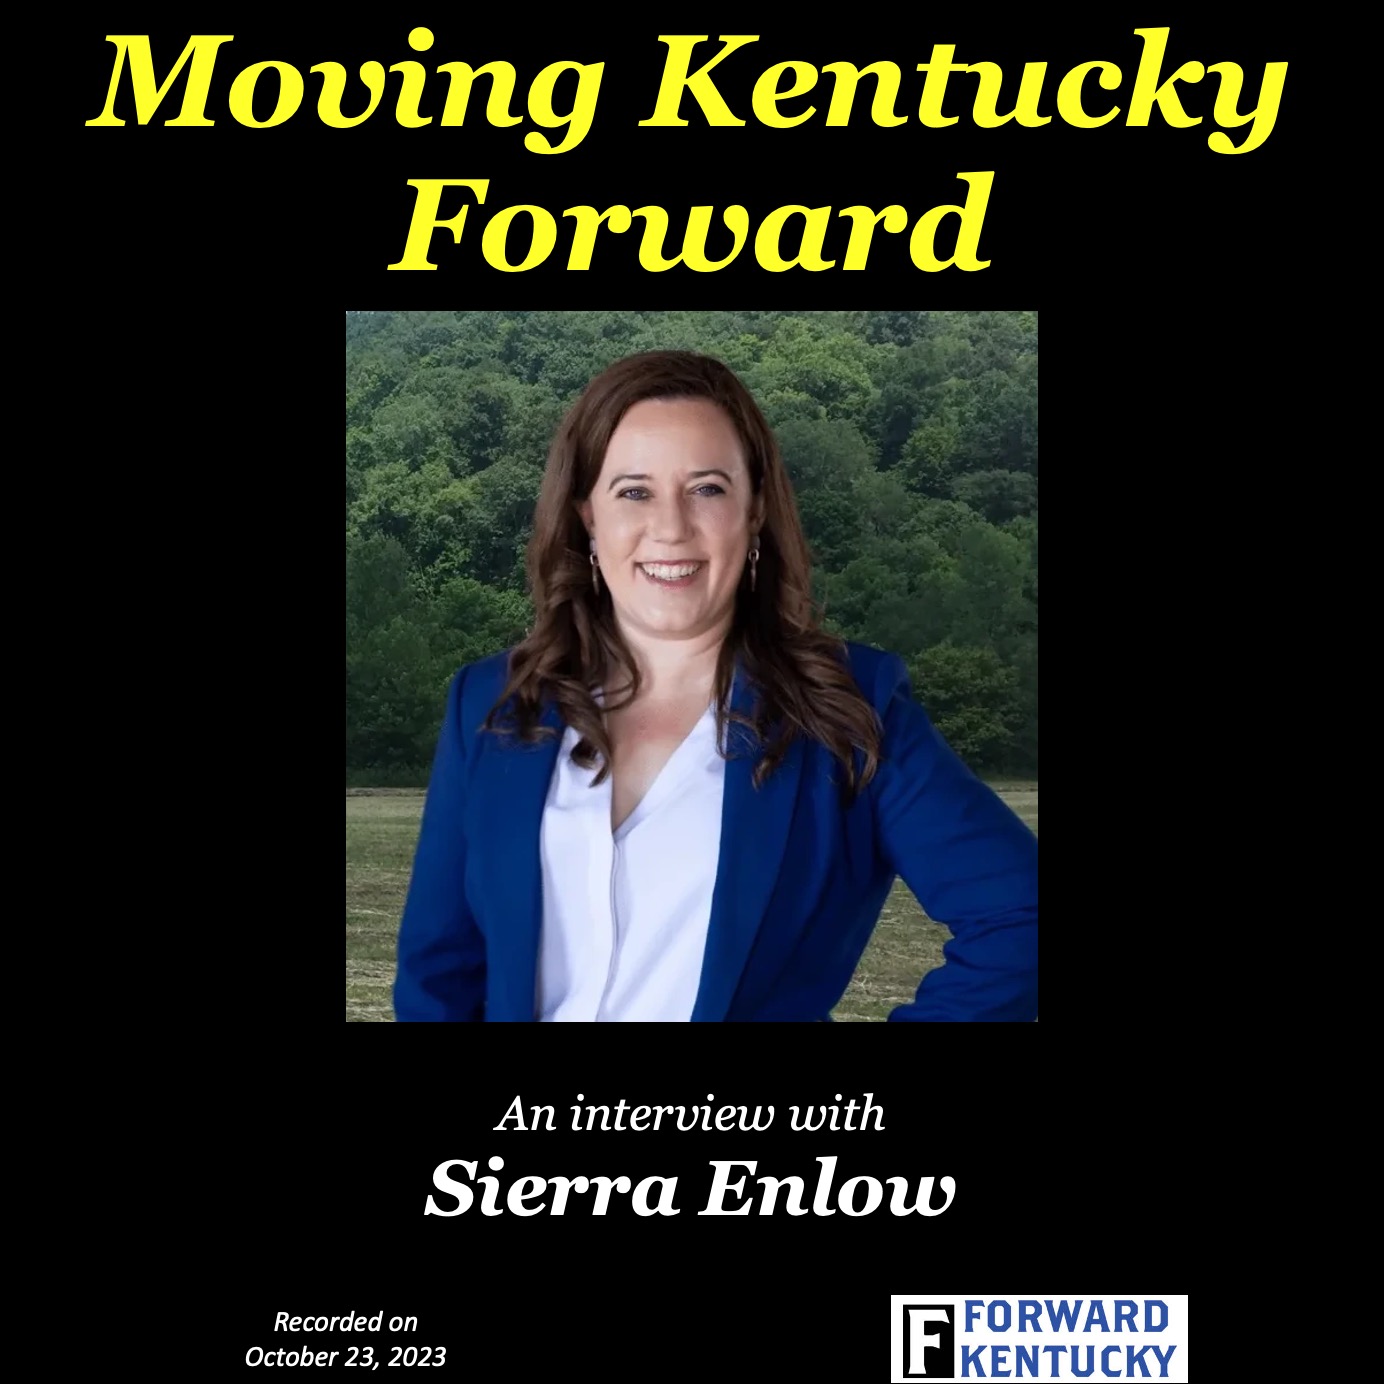 An interview with Sierra Enlow